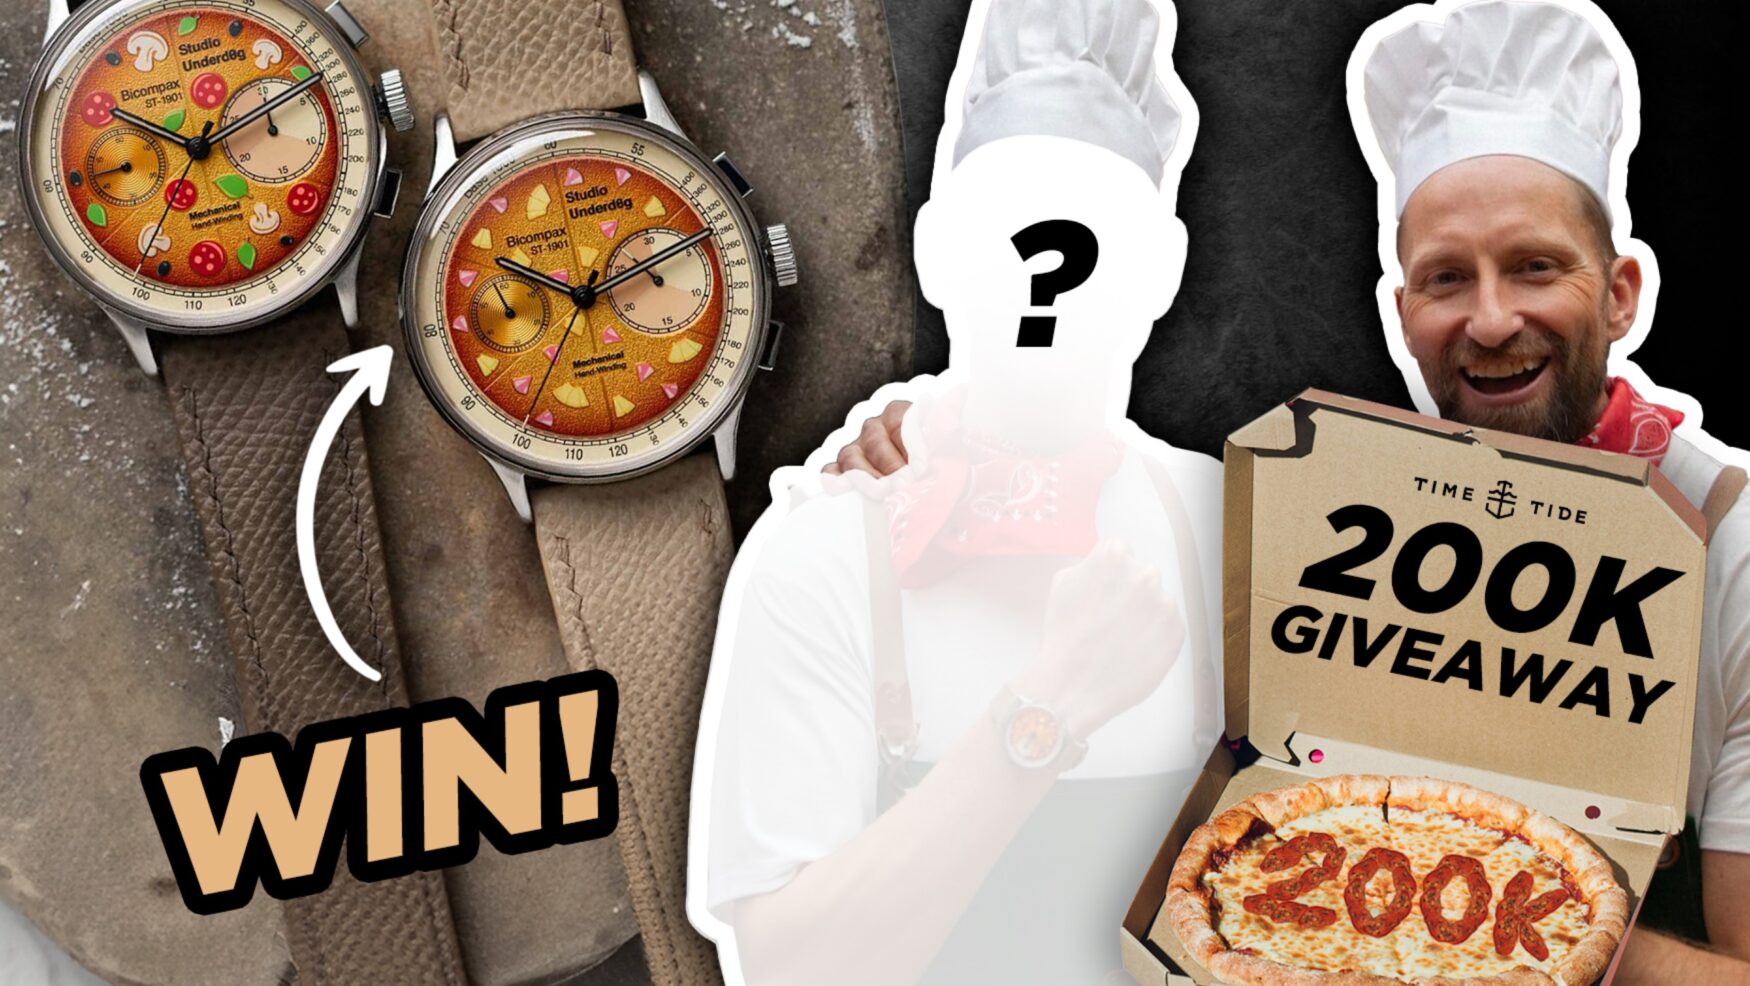 We’re giving away two pizza watches to celebrate 200k followers